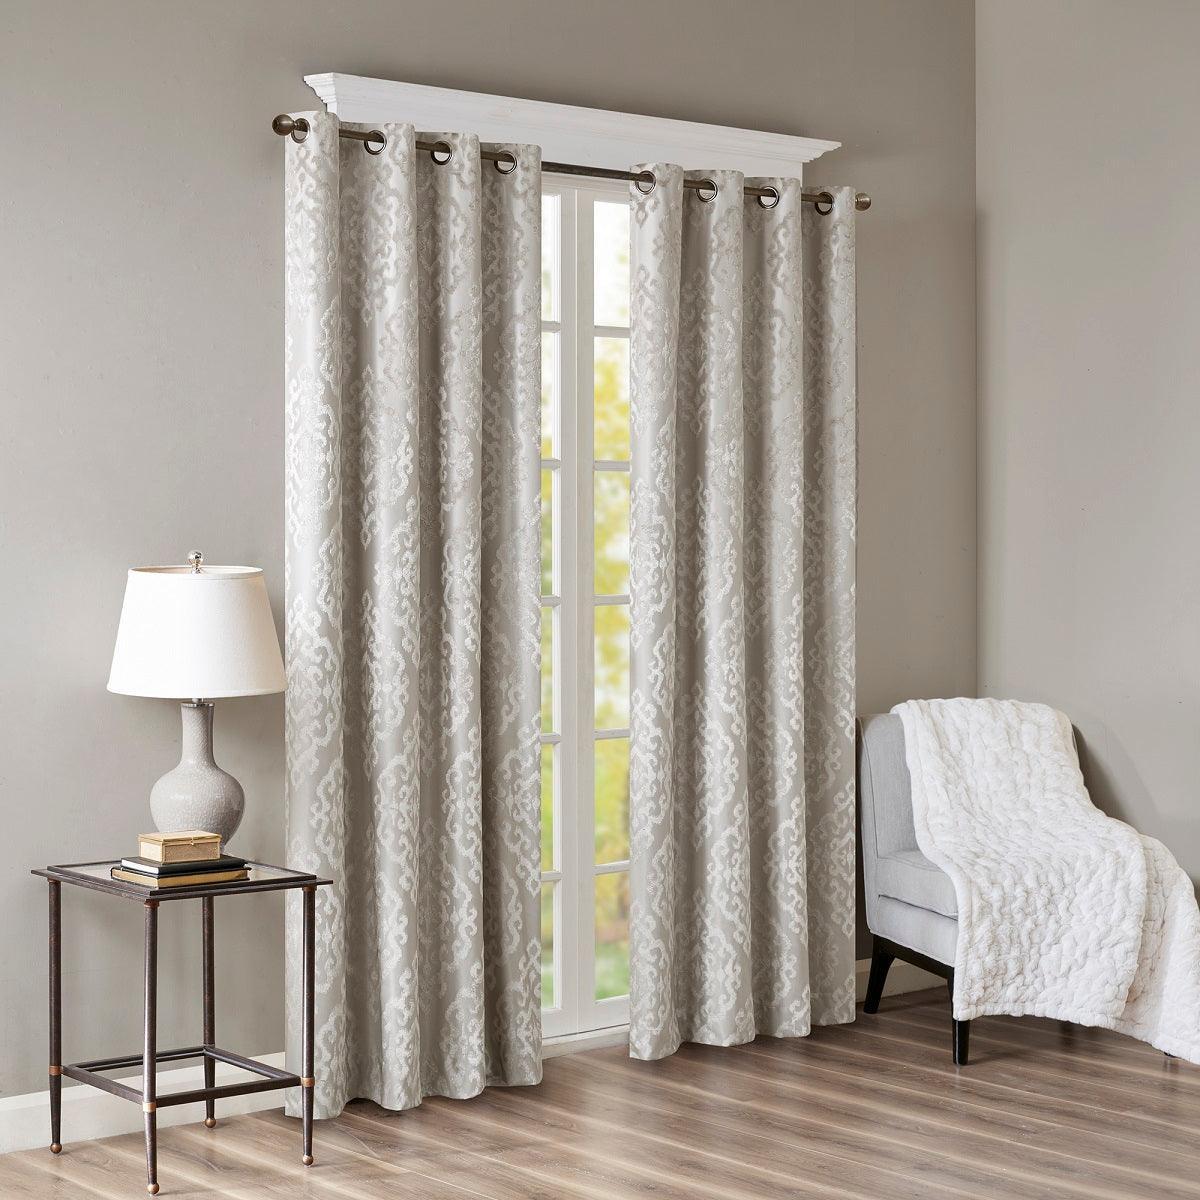 Olliix.com Curtains - Mirage 108 H Knitted Jacquard Damask Total Blackout Grommet Top Curtain Panel Gray